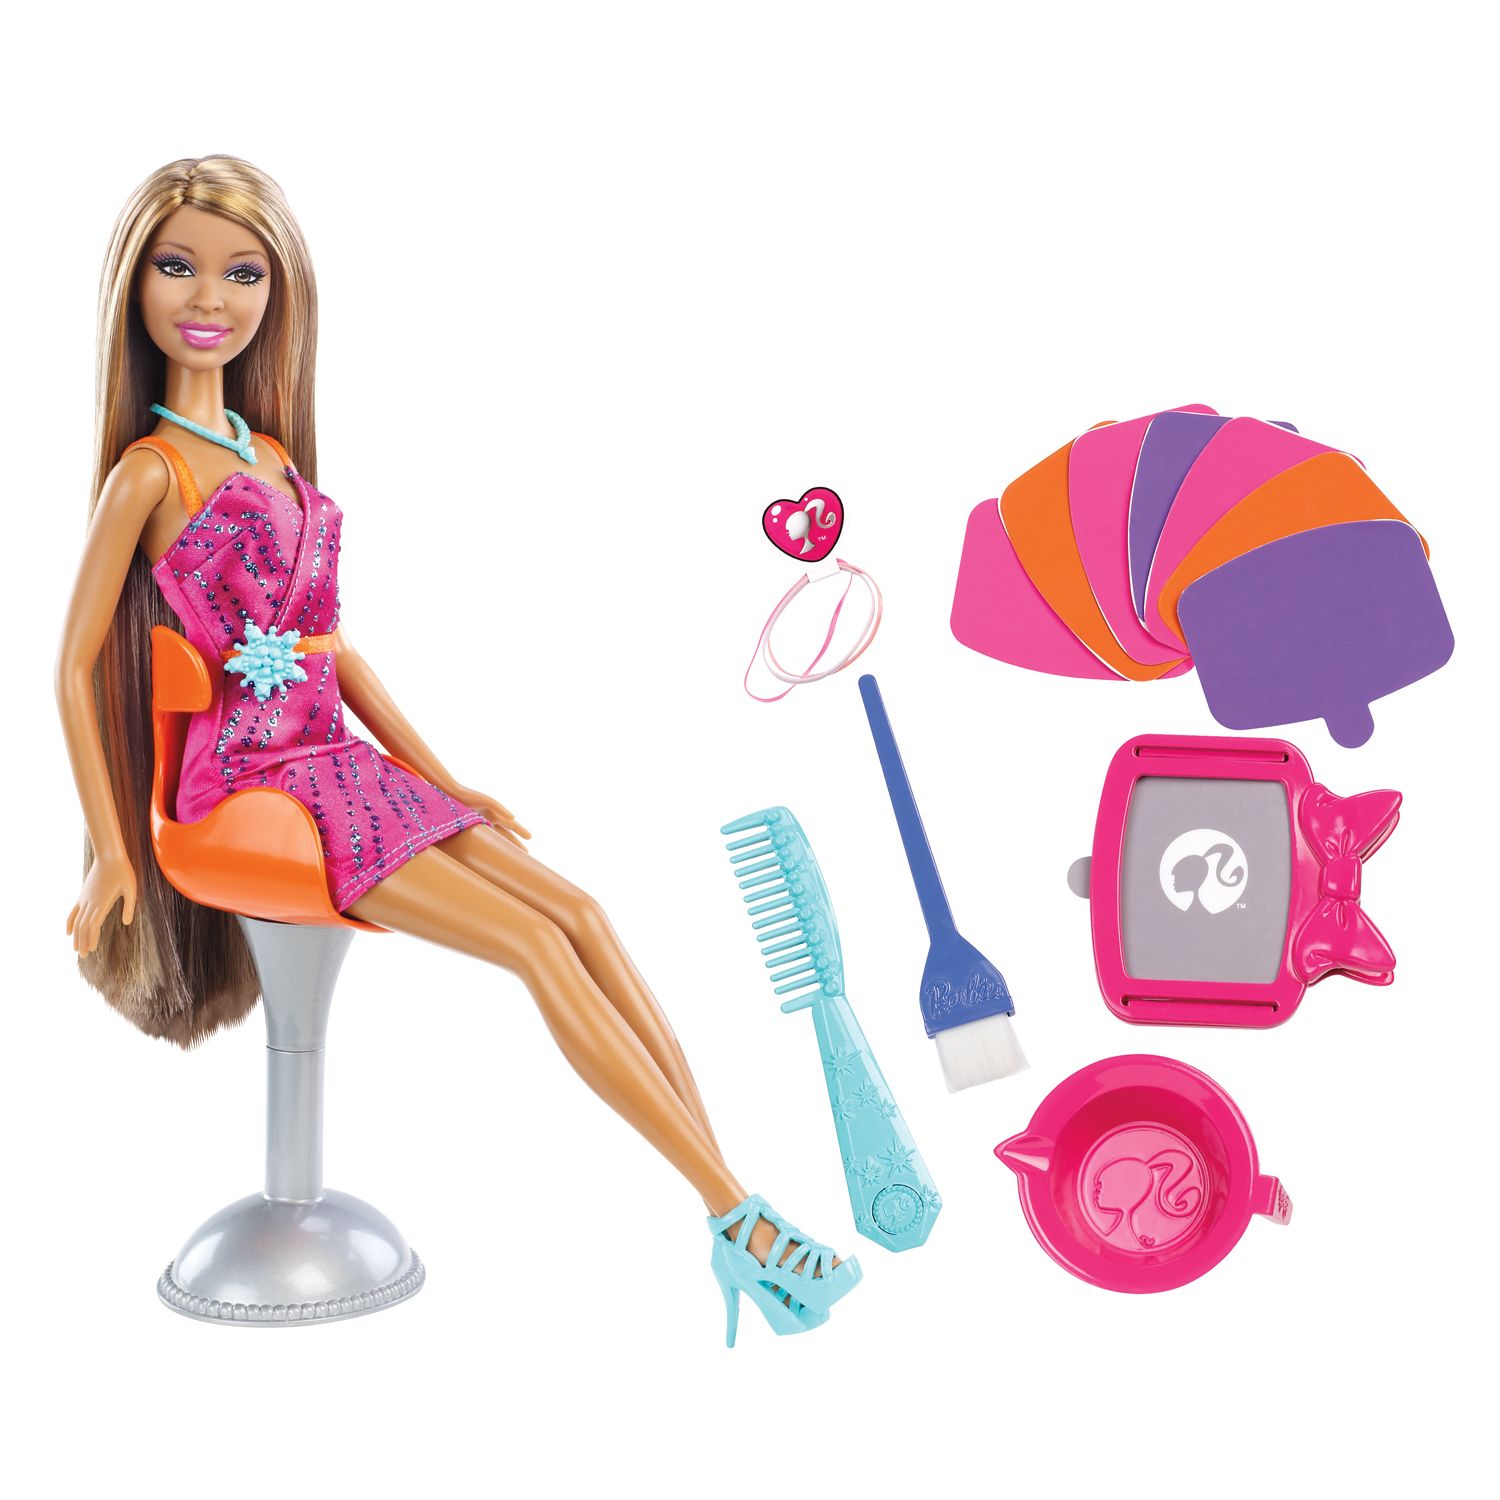 Barbie Color Stylin' Hair Doll by Mattel